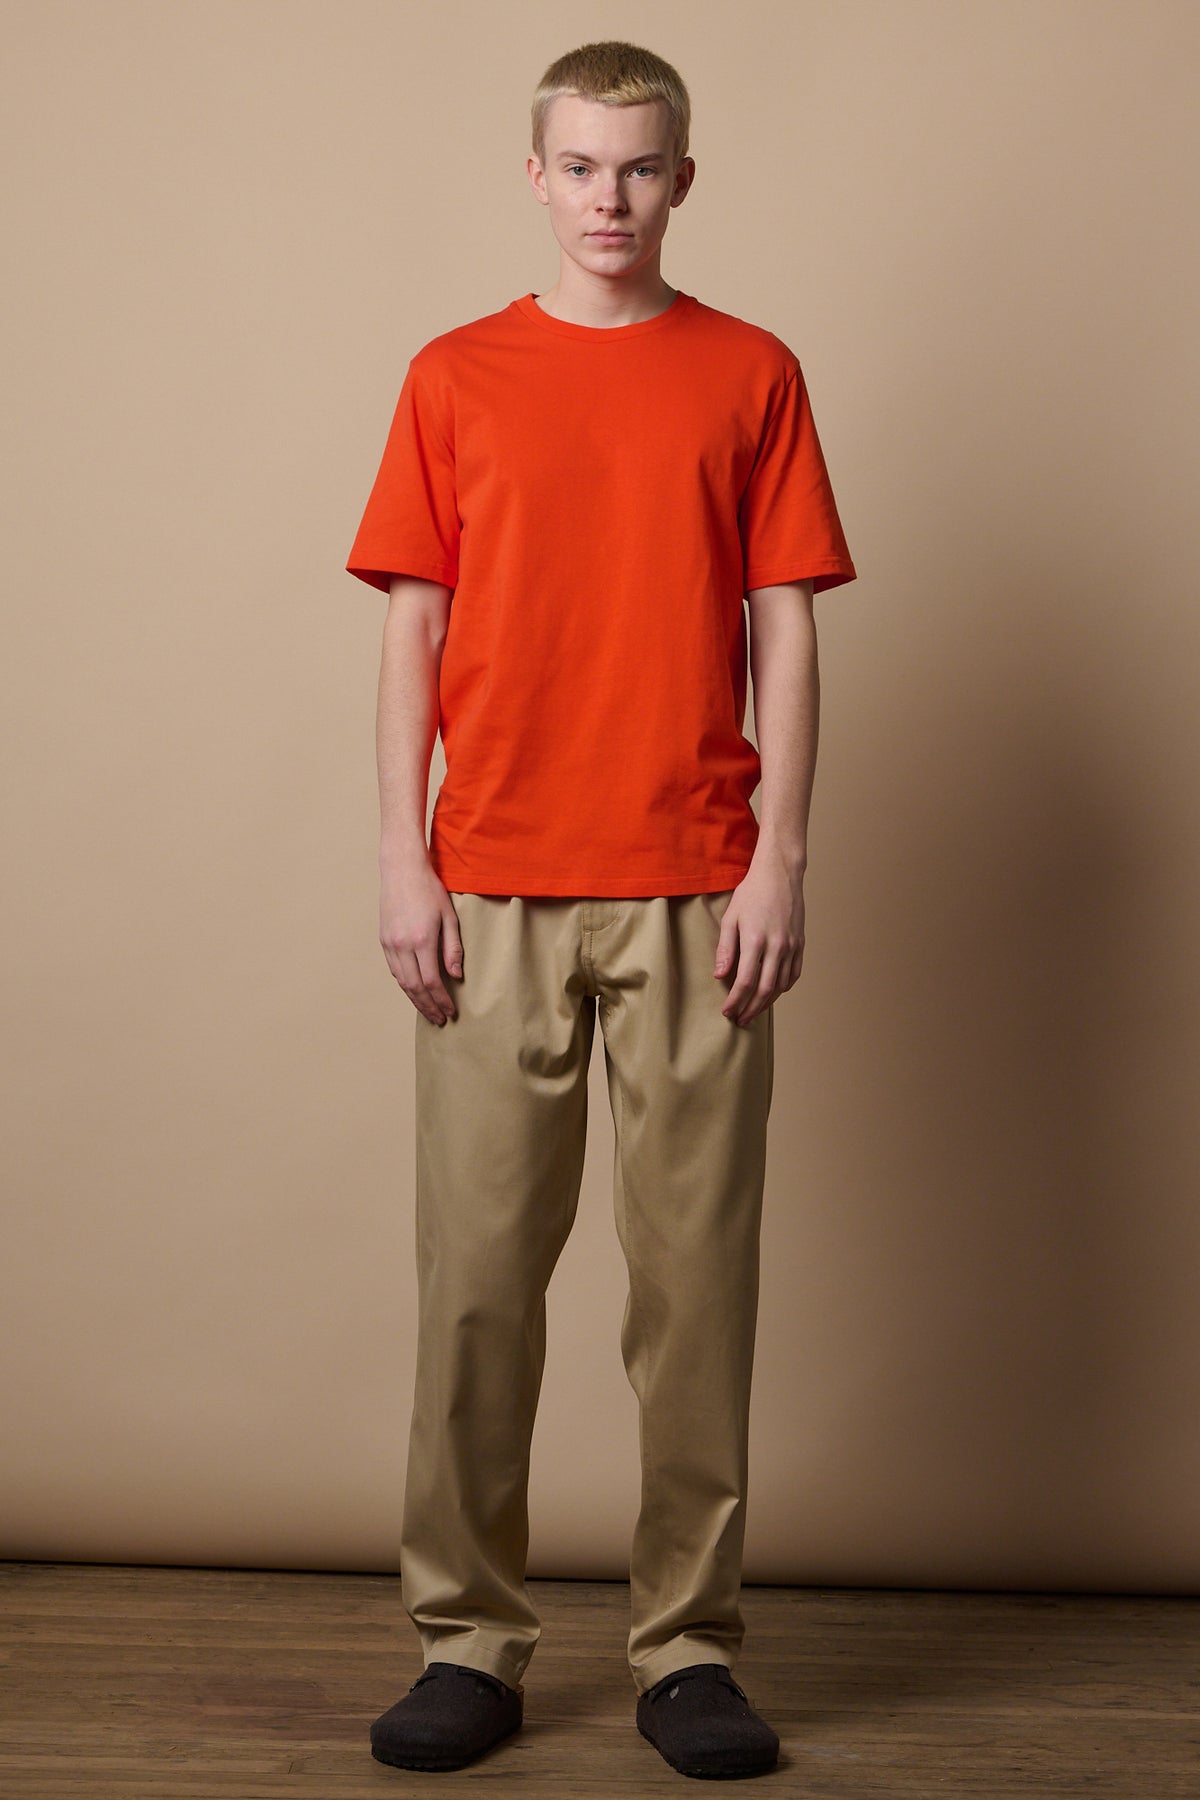 
            Full body image of white male with short blonde hair wearing short sleeve t shirt in flame red